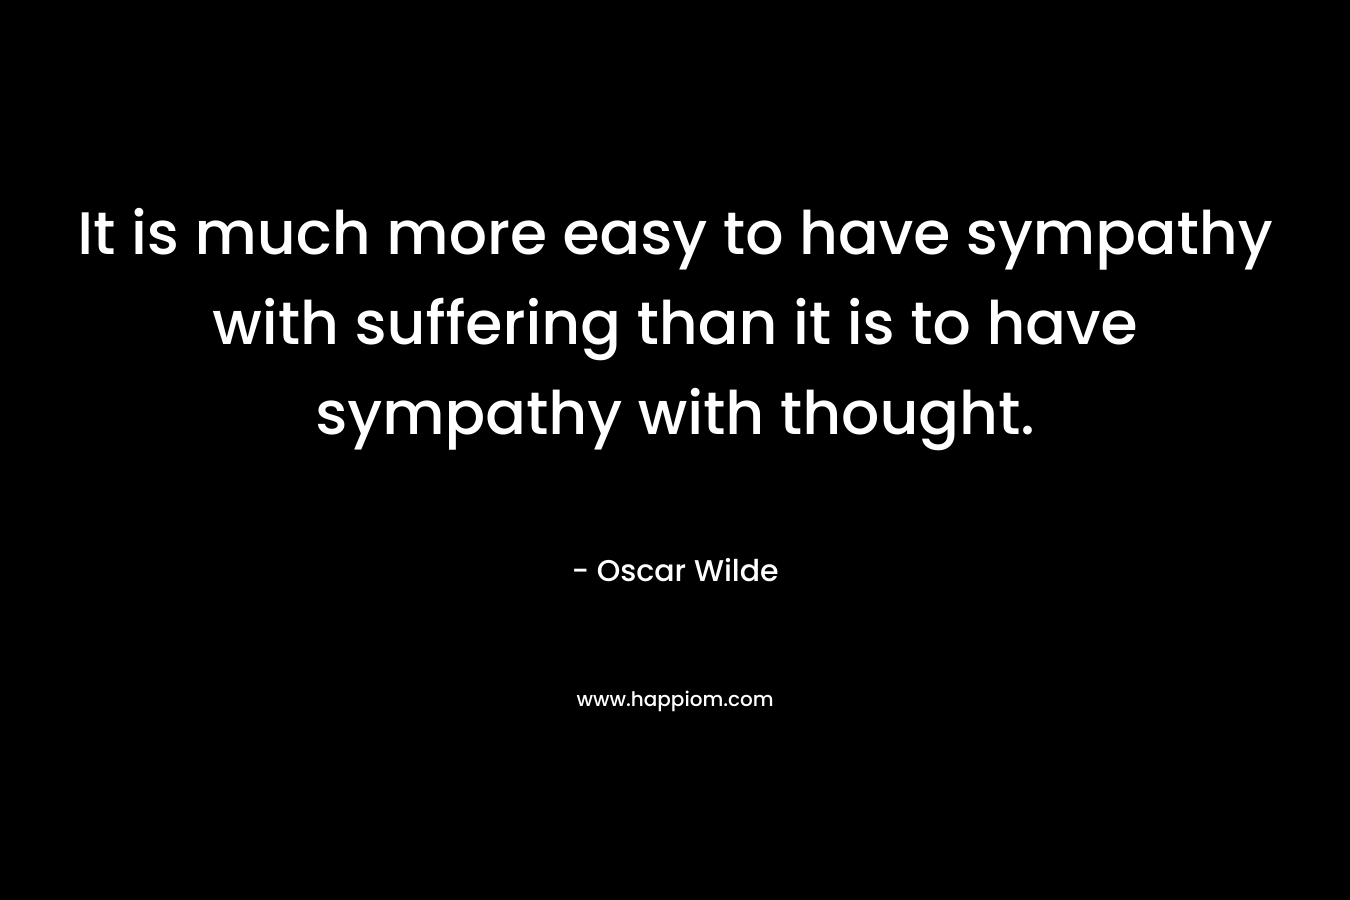 It is much more easy to have sympathy with suffering than it is to have sympathy with thought.